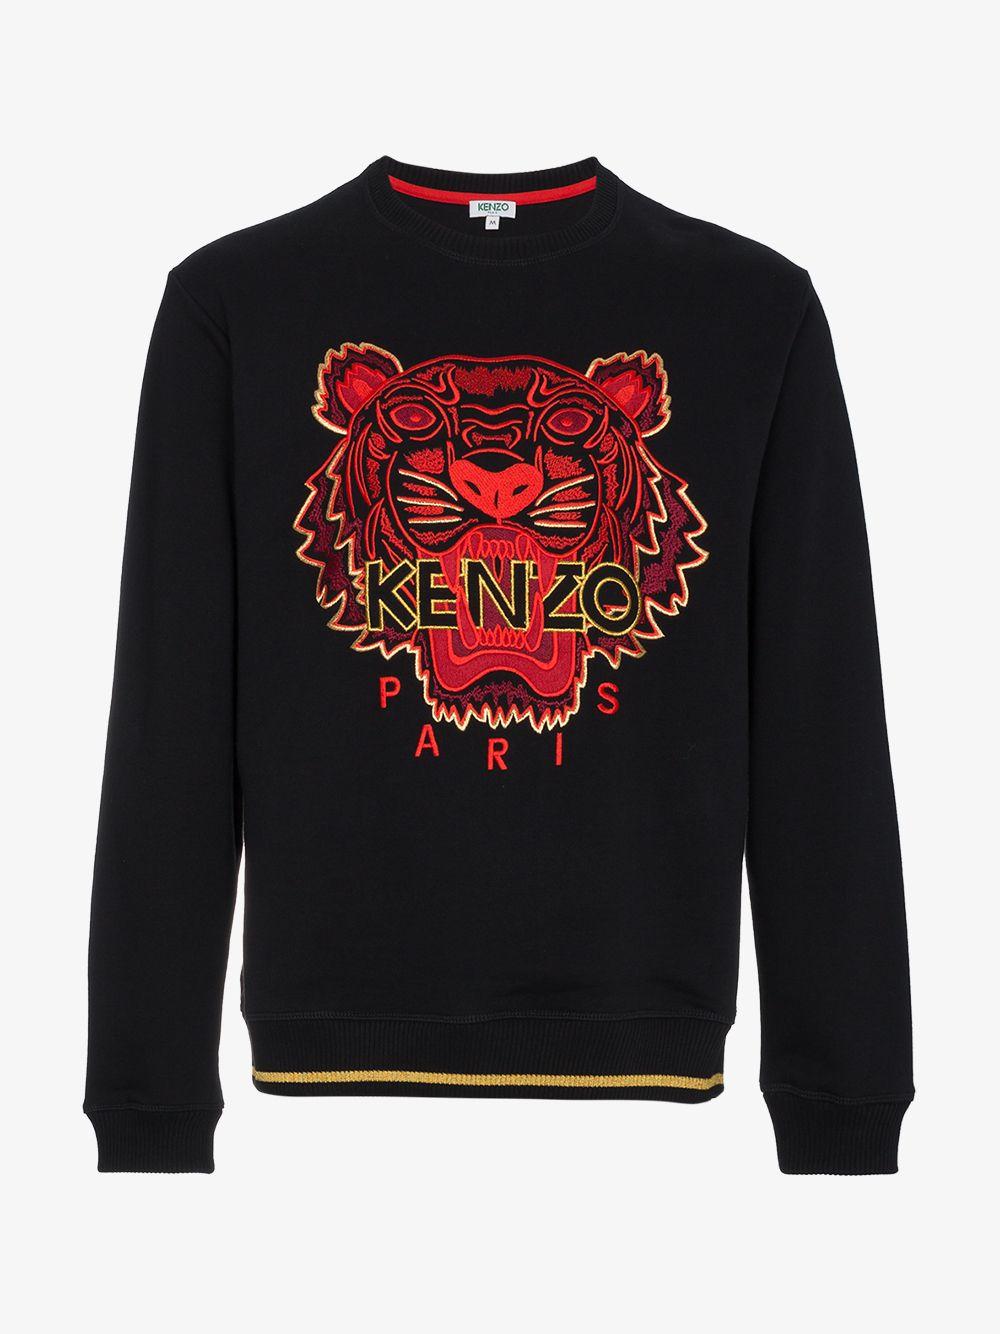 limited edition kenzo jumper